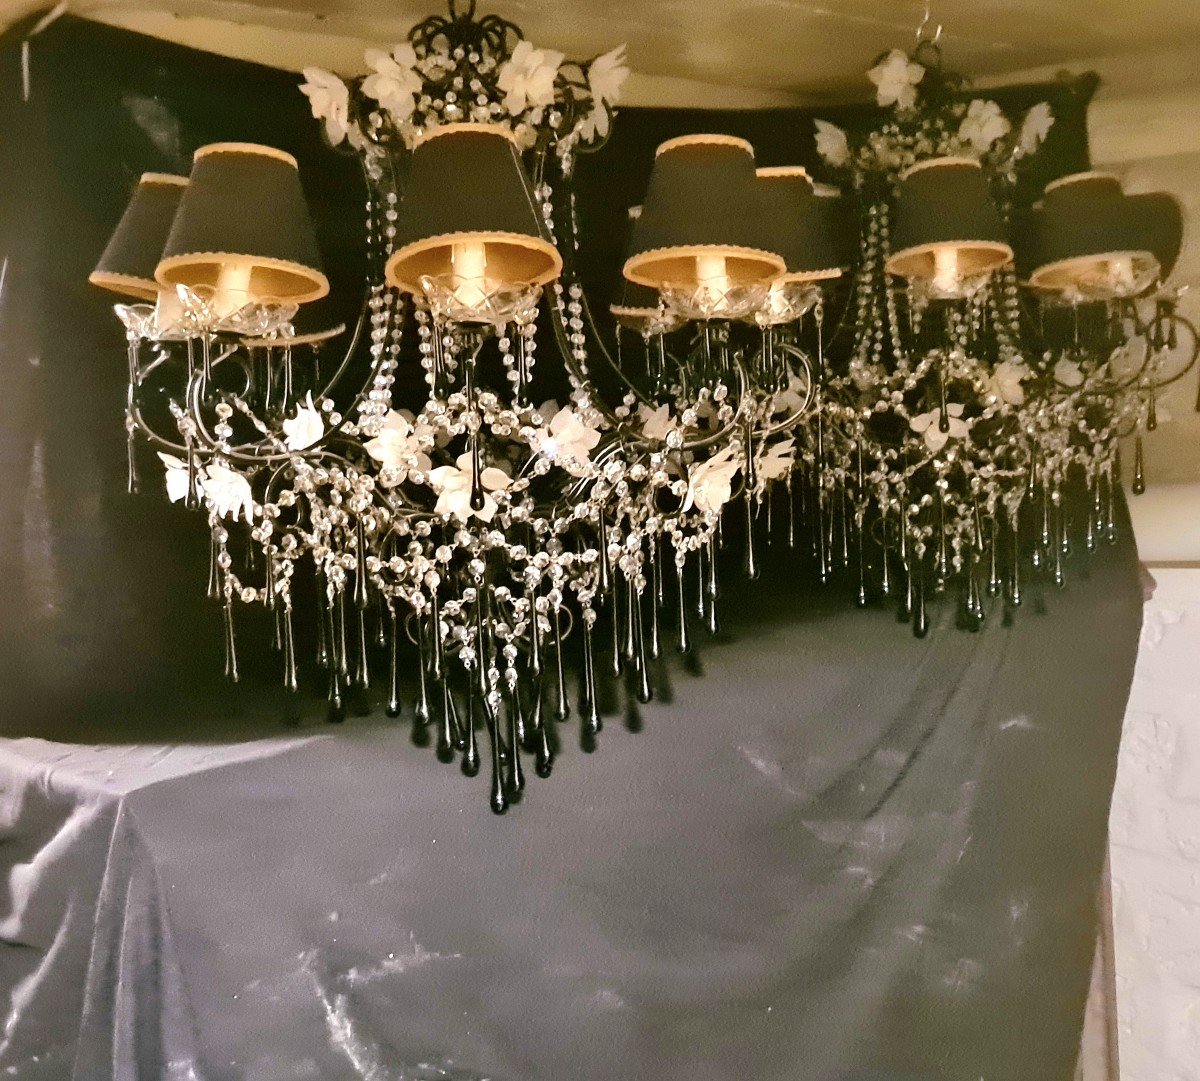 Pair Of Black Lacquered Metal Chandeliers Decorated With Faceted Beads, Drops, And Frosted Flowers